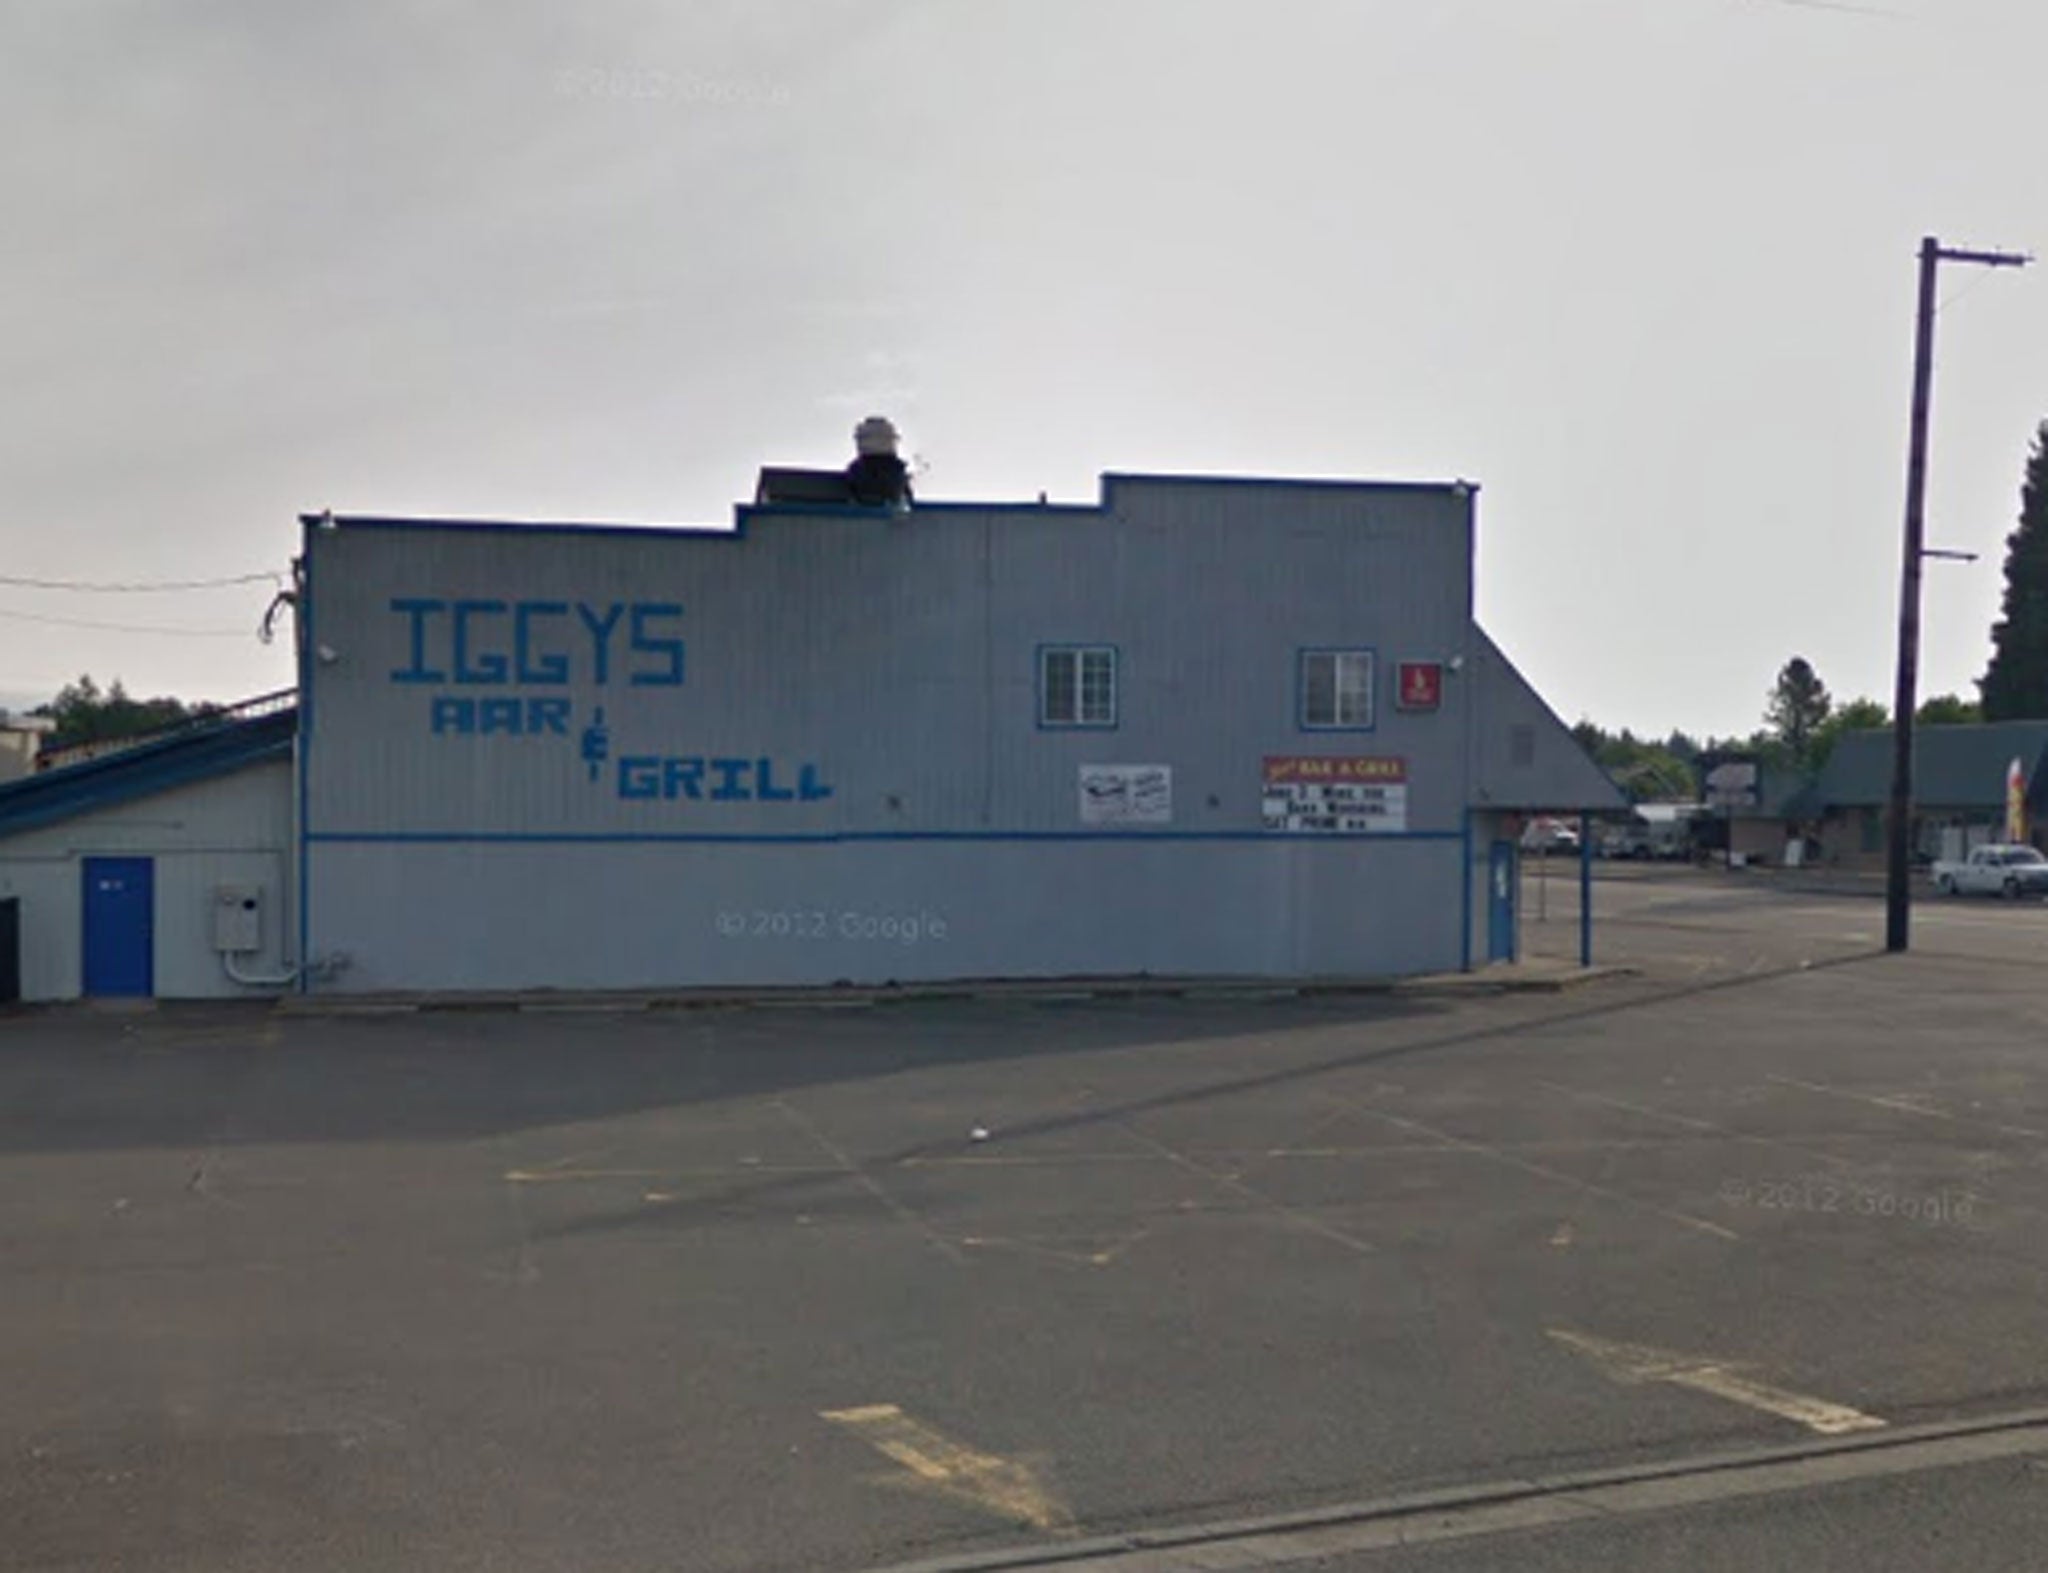 The alleged incident happened at Iggy's Bar and Grill, Oregon